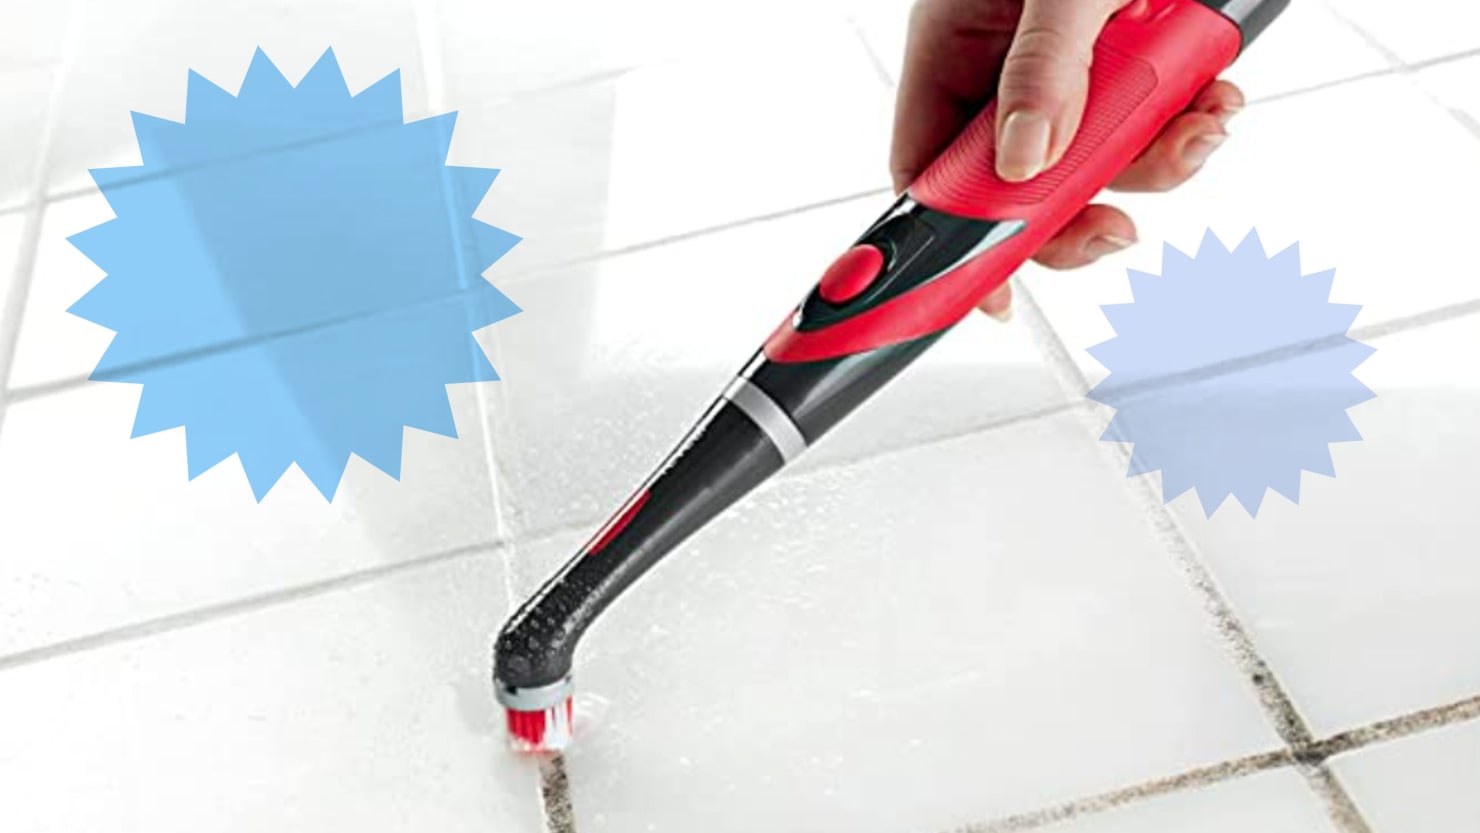 This Rubbermaid Power Scrubber Cleans Tiles and Tight Spaces So